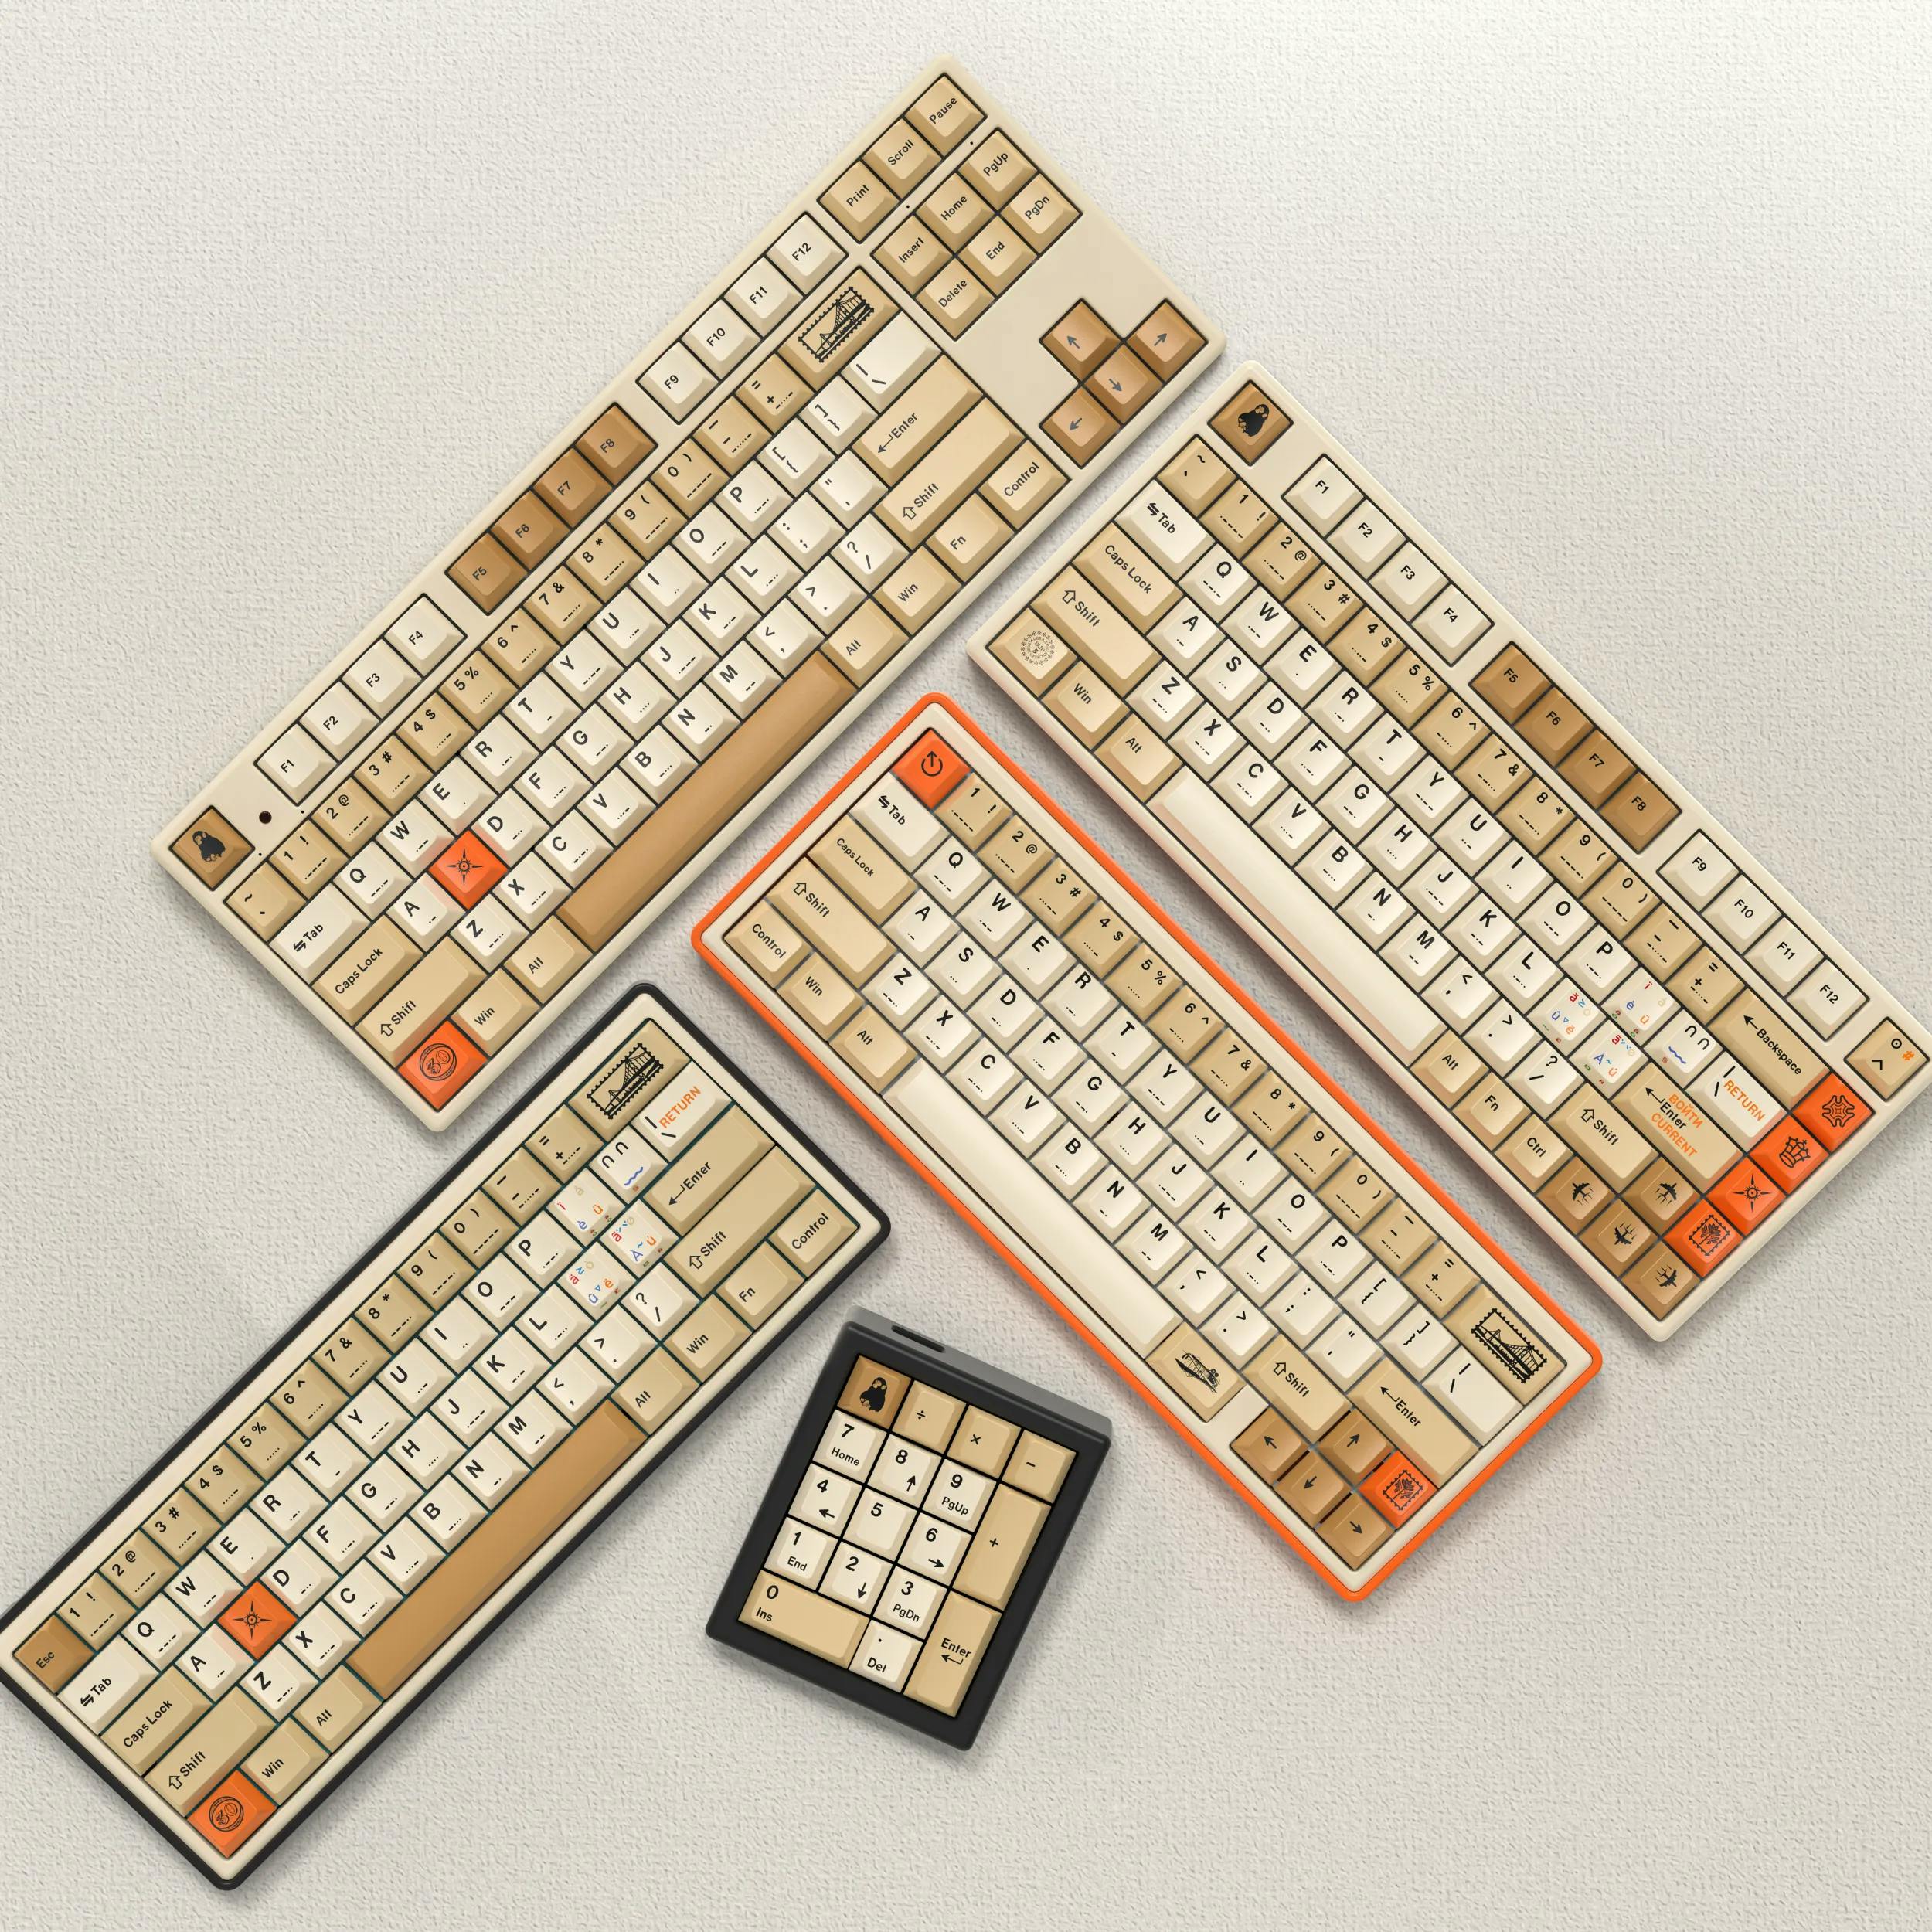 Image for Stamp PBT Keycaps